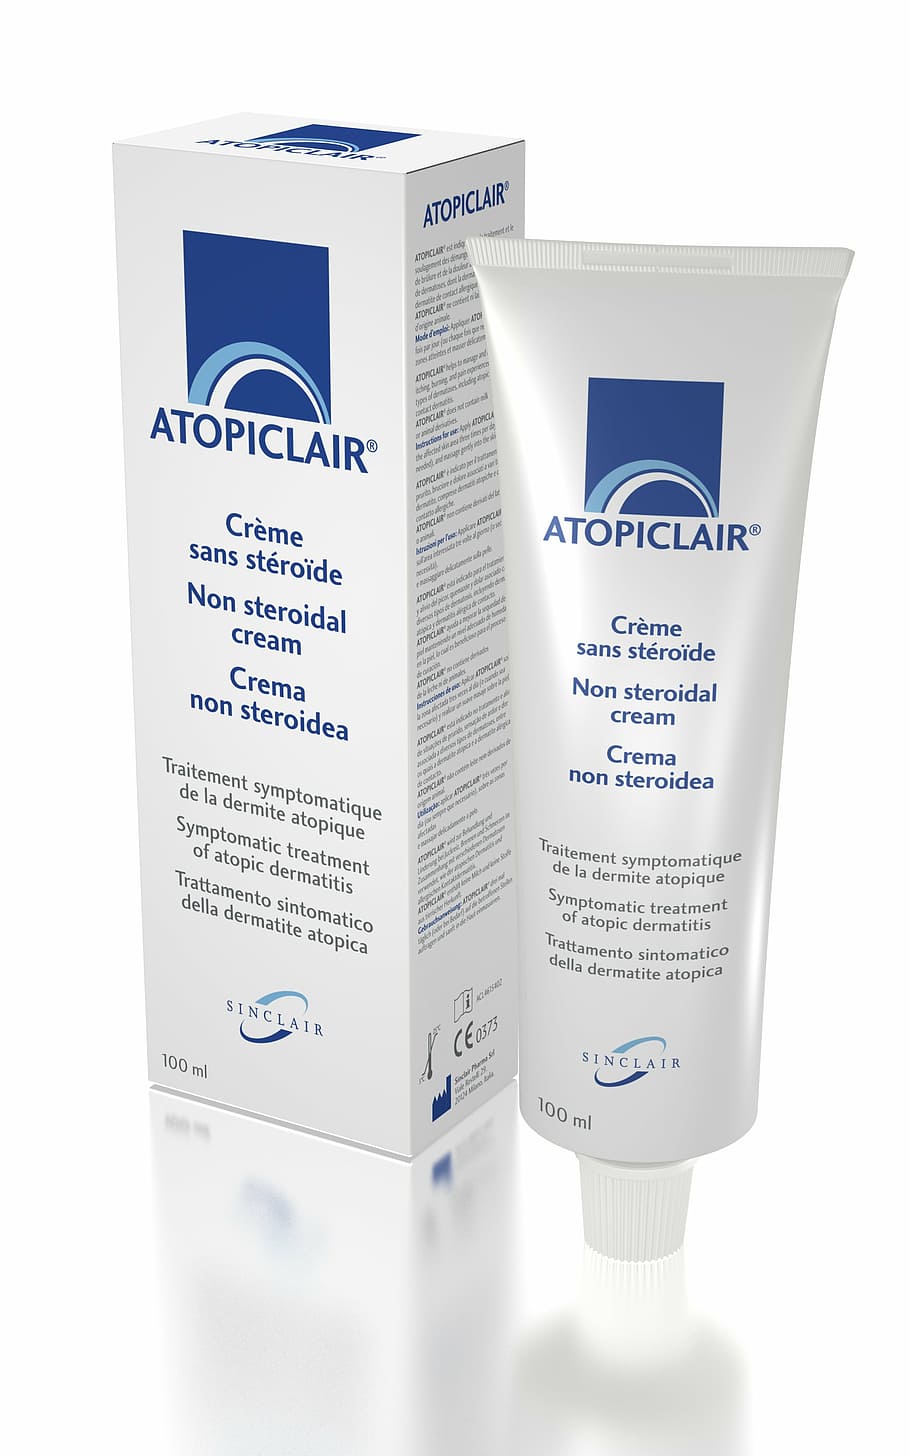 atopiclair, product, cream, lotion, cosmetic, care, skin, hygiene, body, treatment